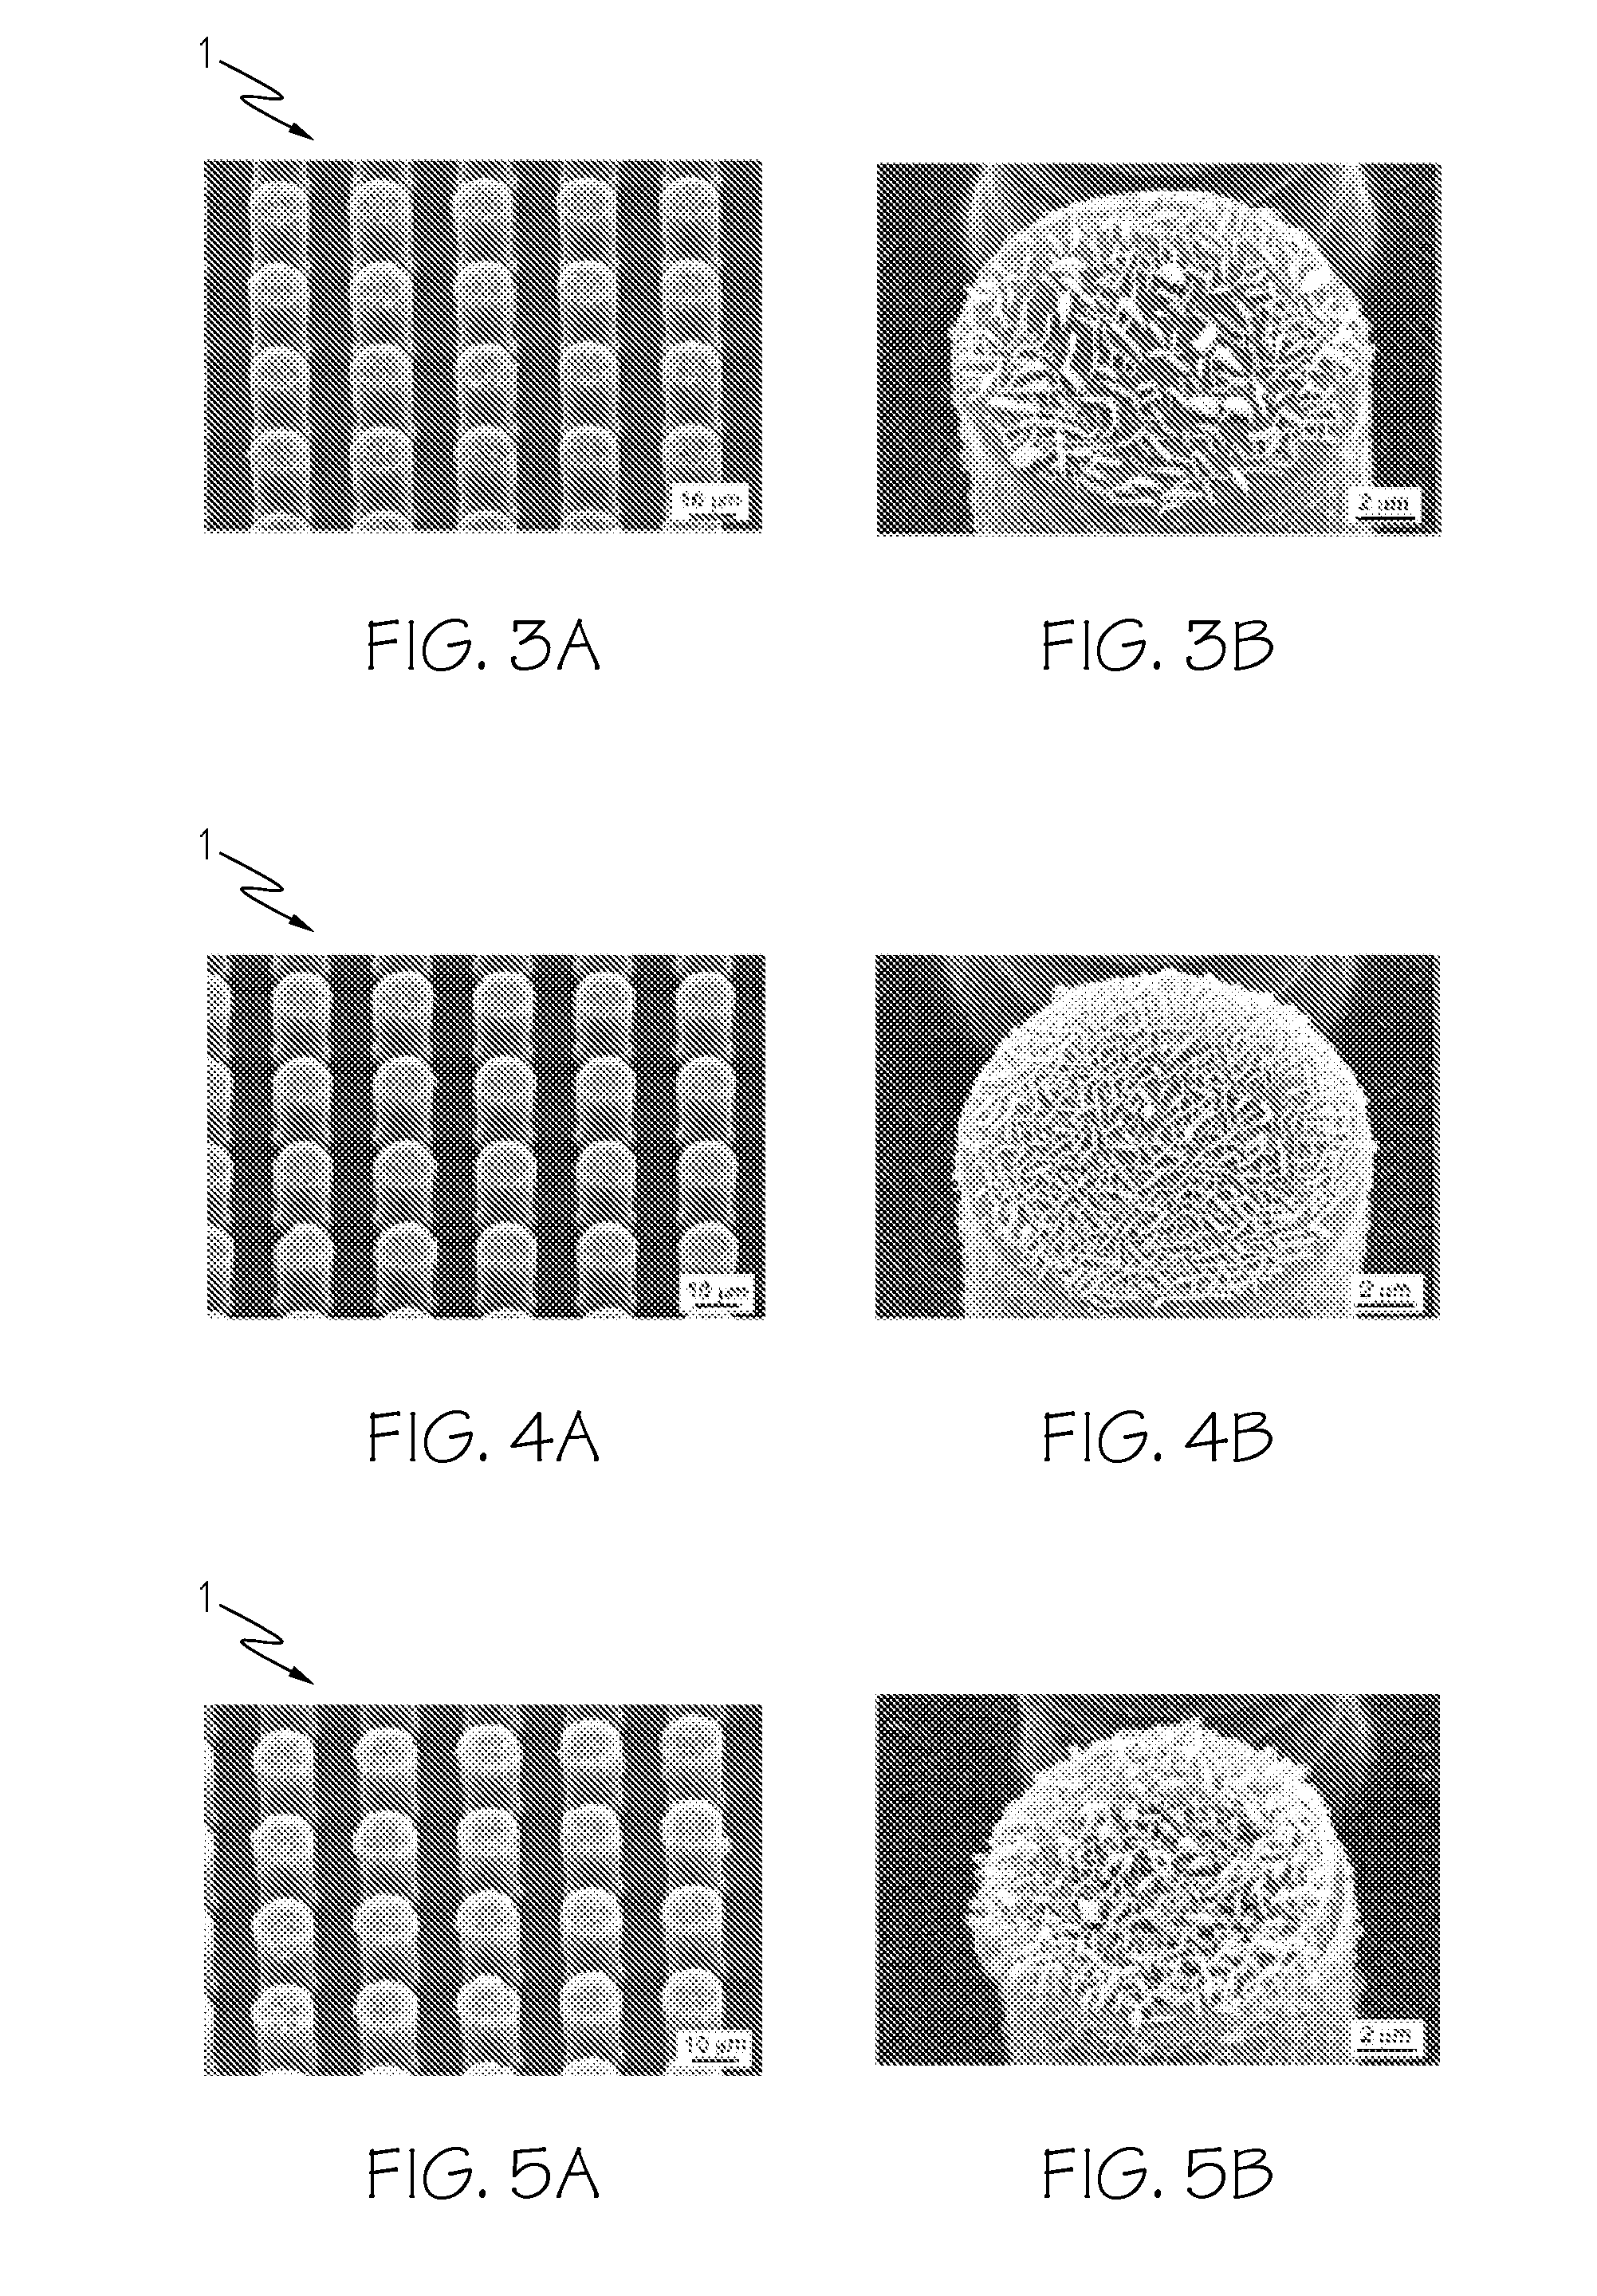 Hierarchical structures for superhydrophobic surfaces and methods of making